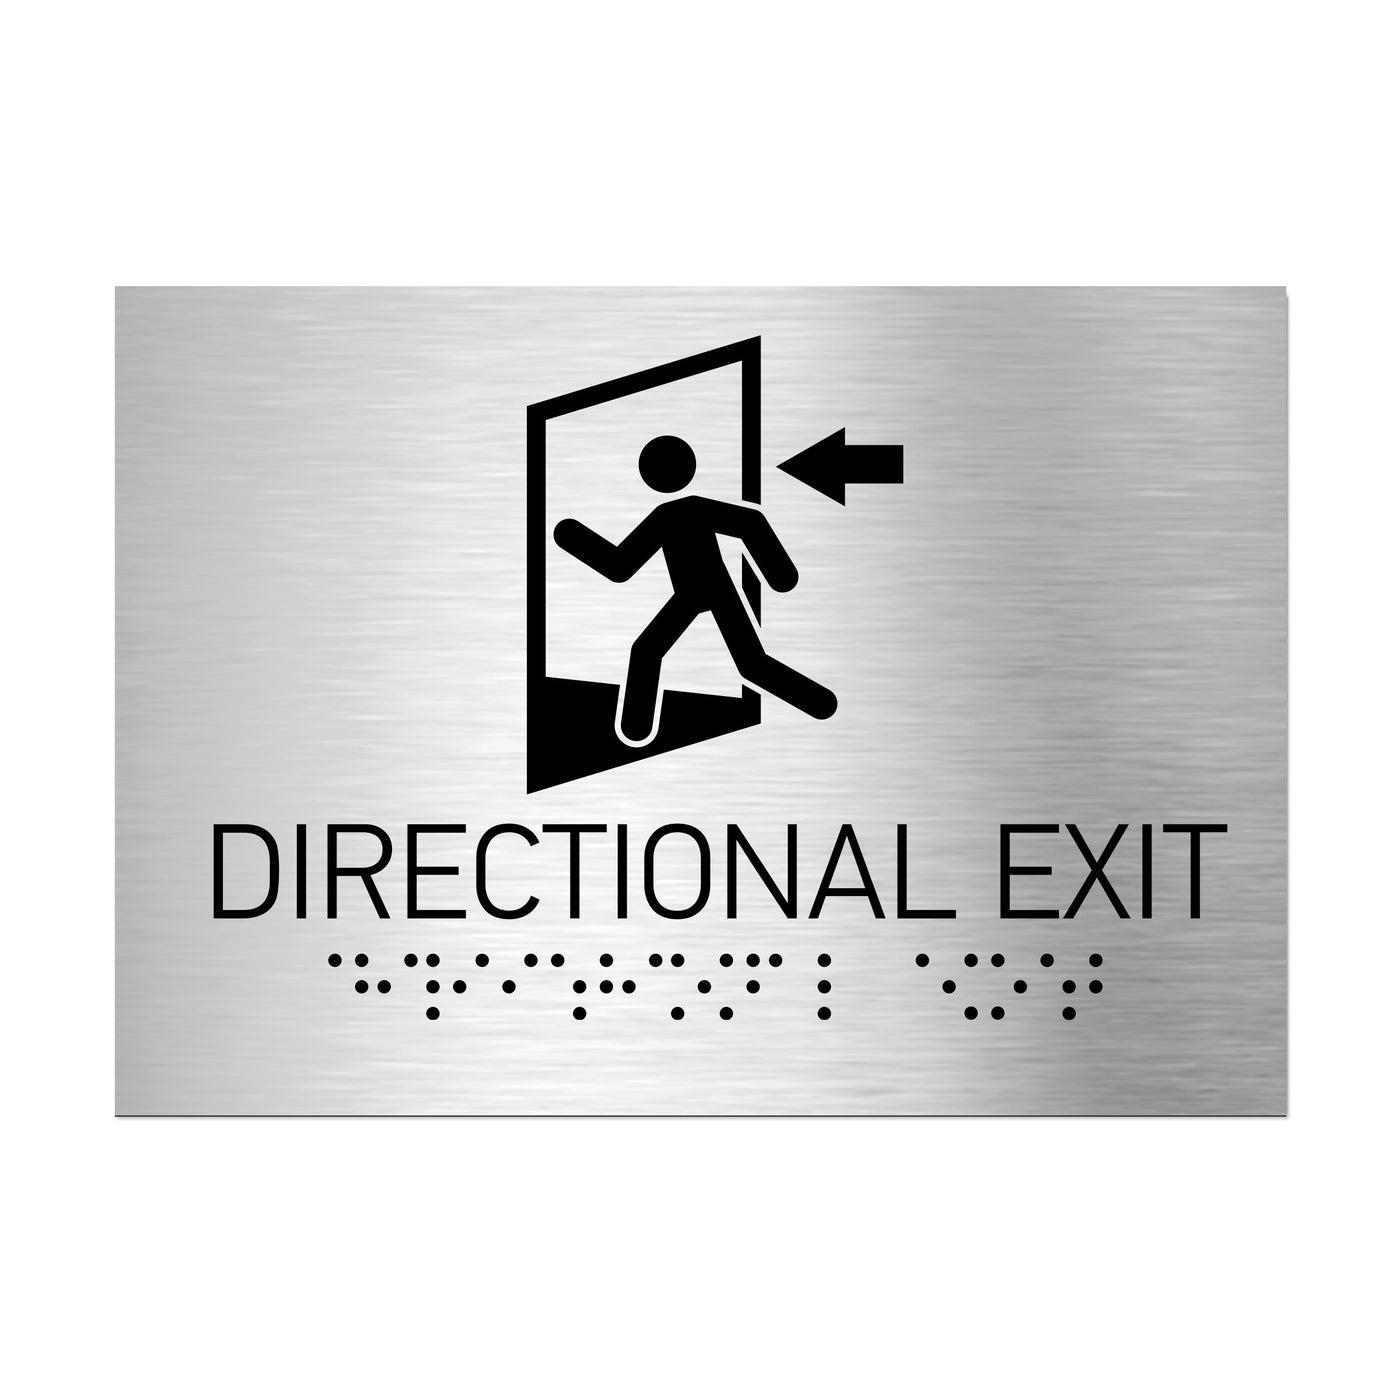 Information Signs - Directional Exit Door Sign Stainless Steel Whith Braille